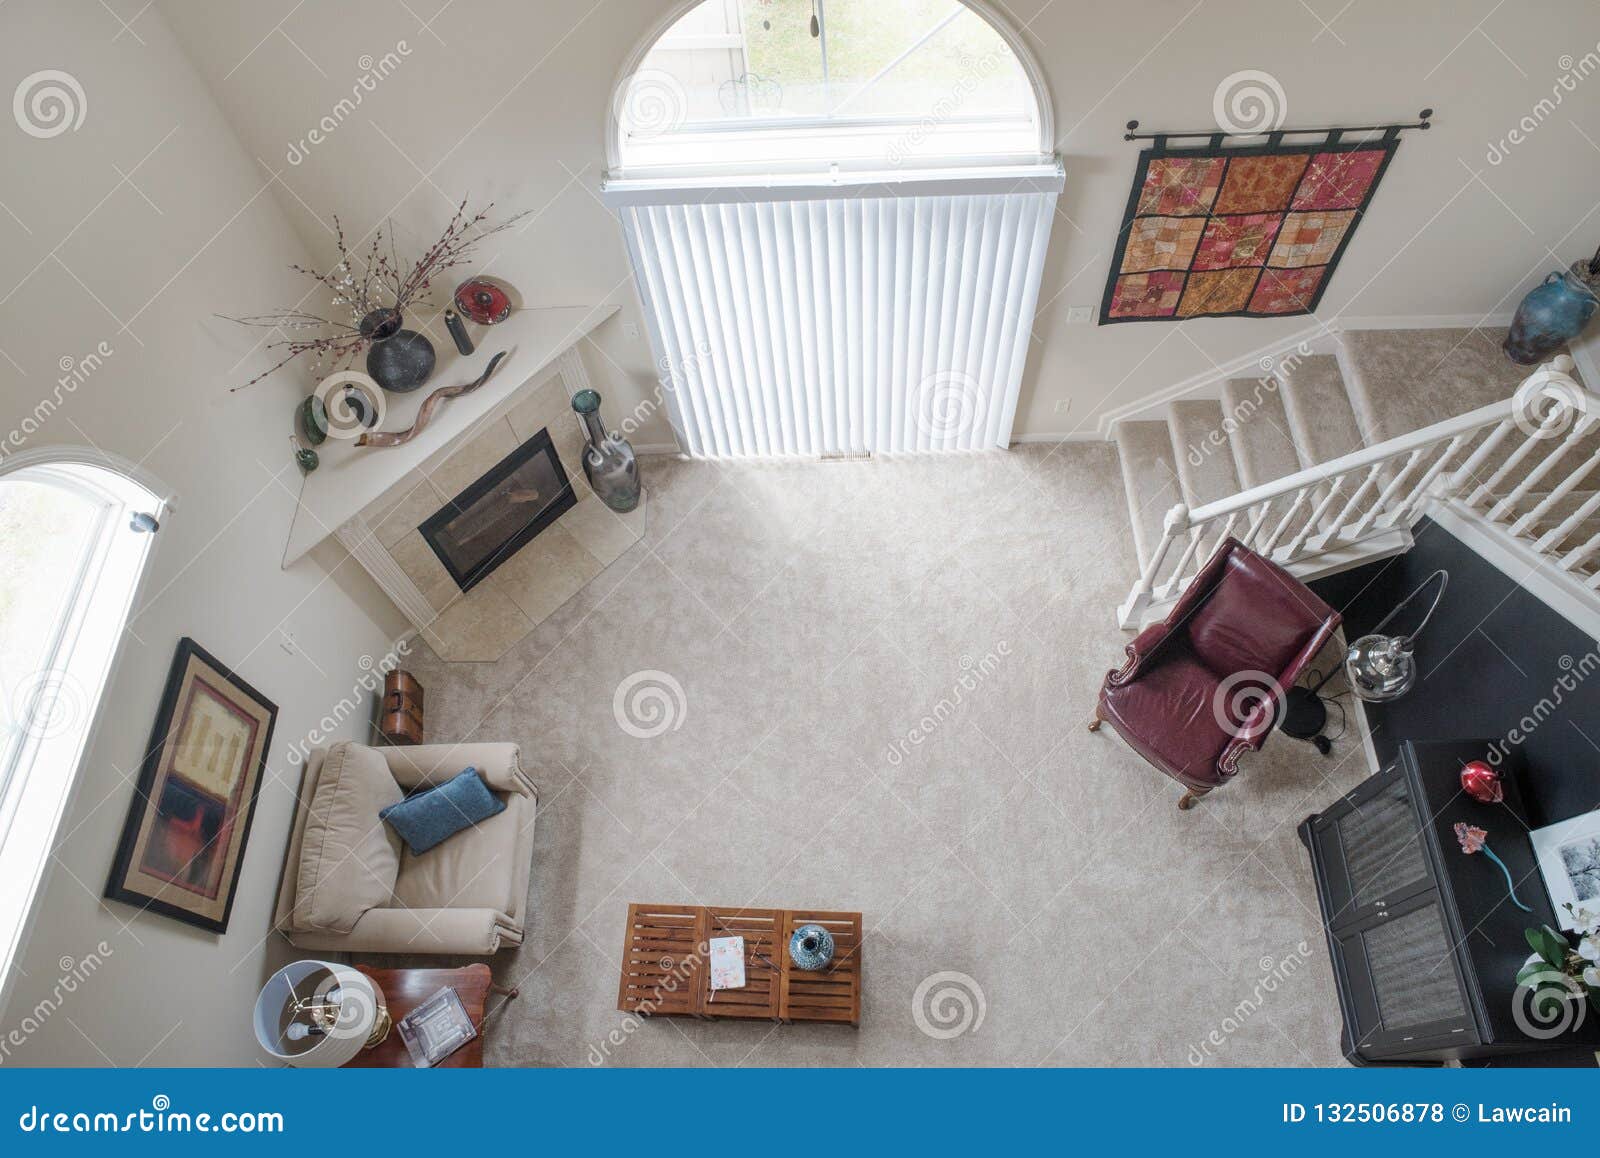 Condo Living Room From Loft Editorial Stock Photo Image Of